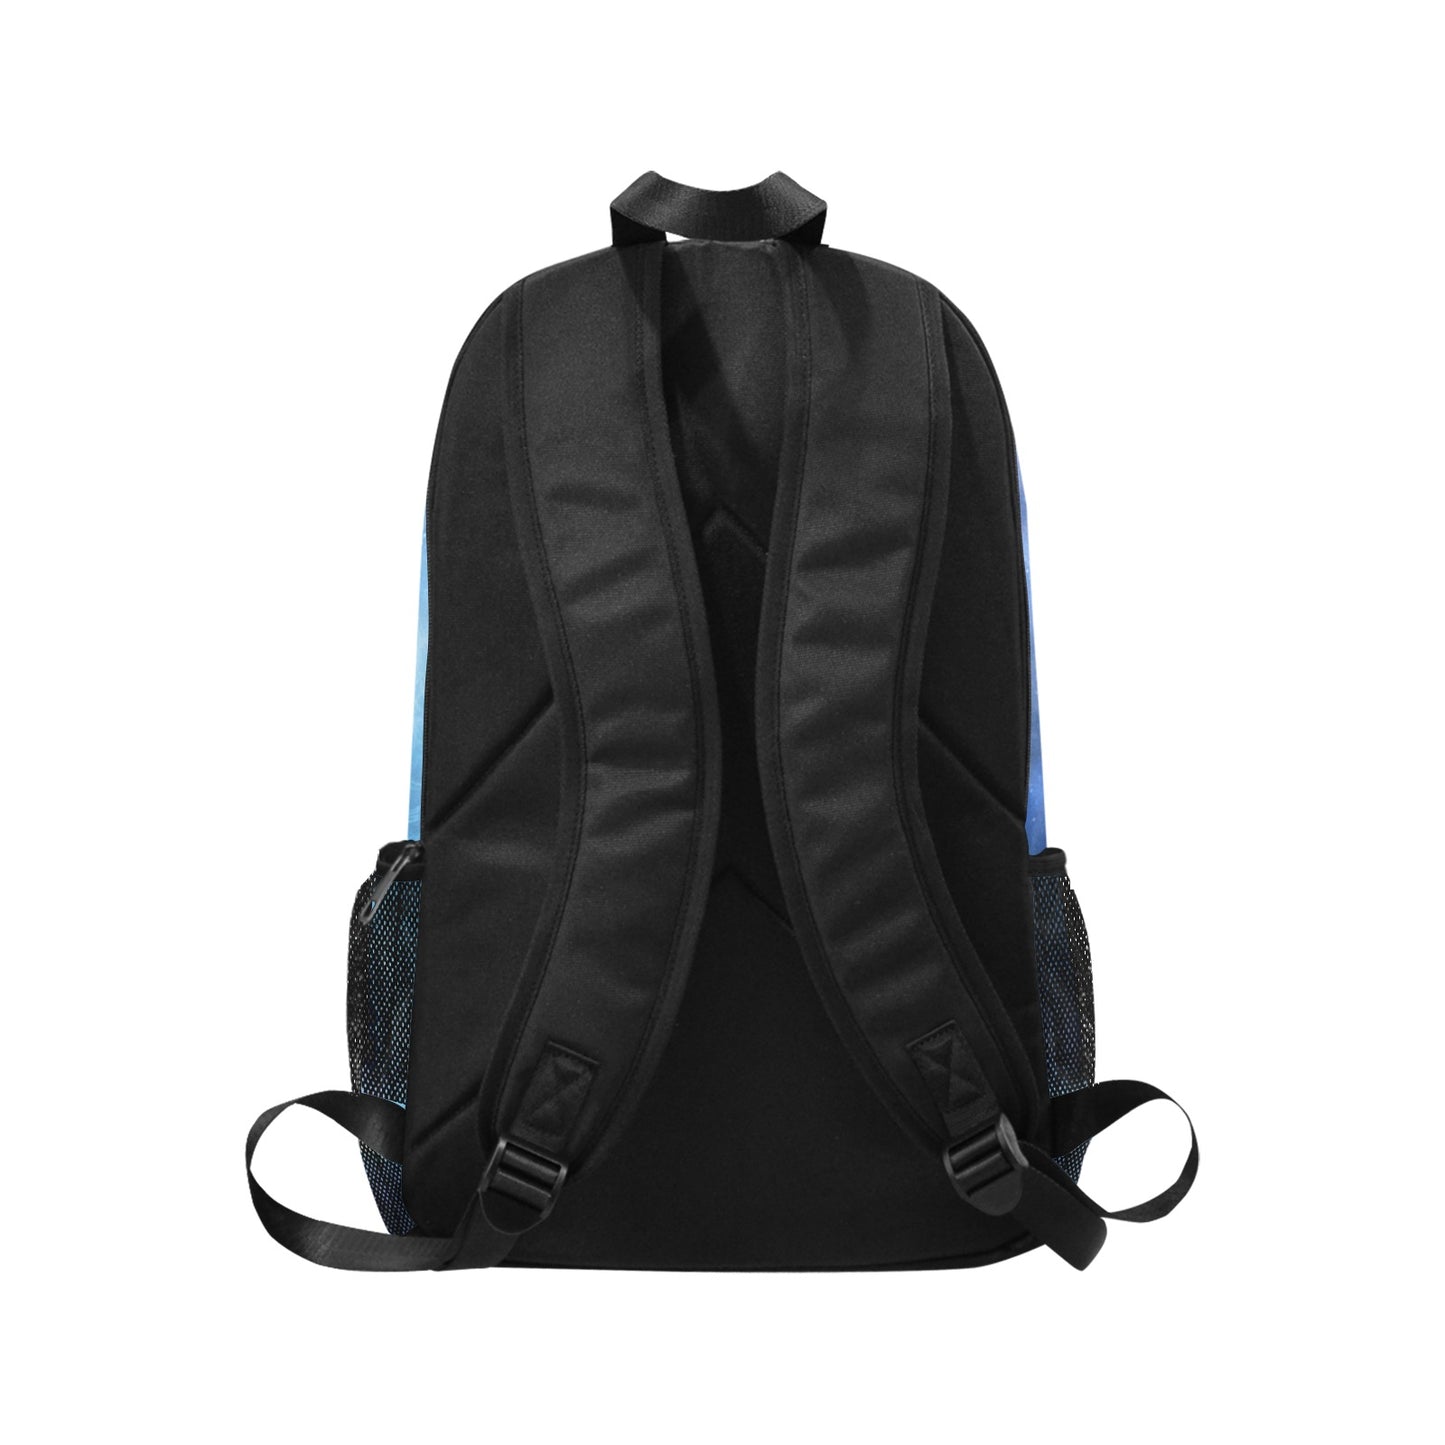 King backpack with mesh side pockets